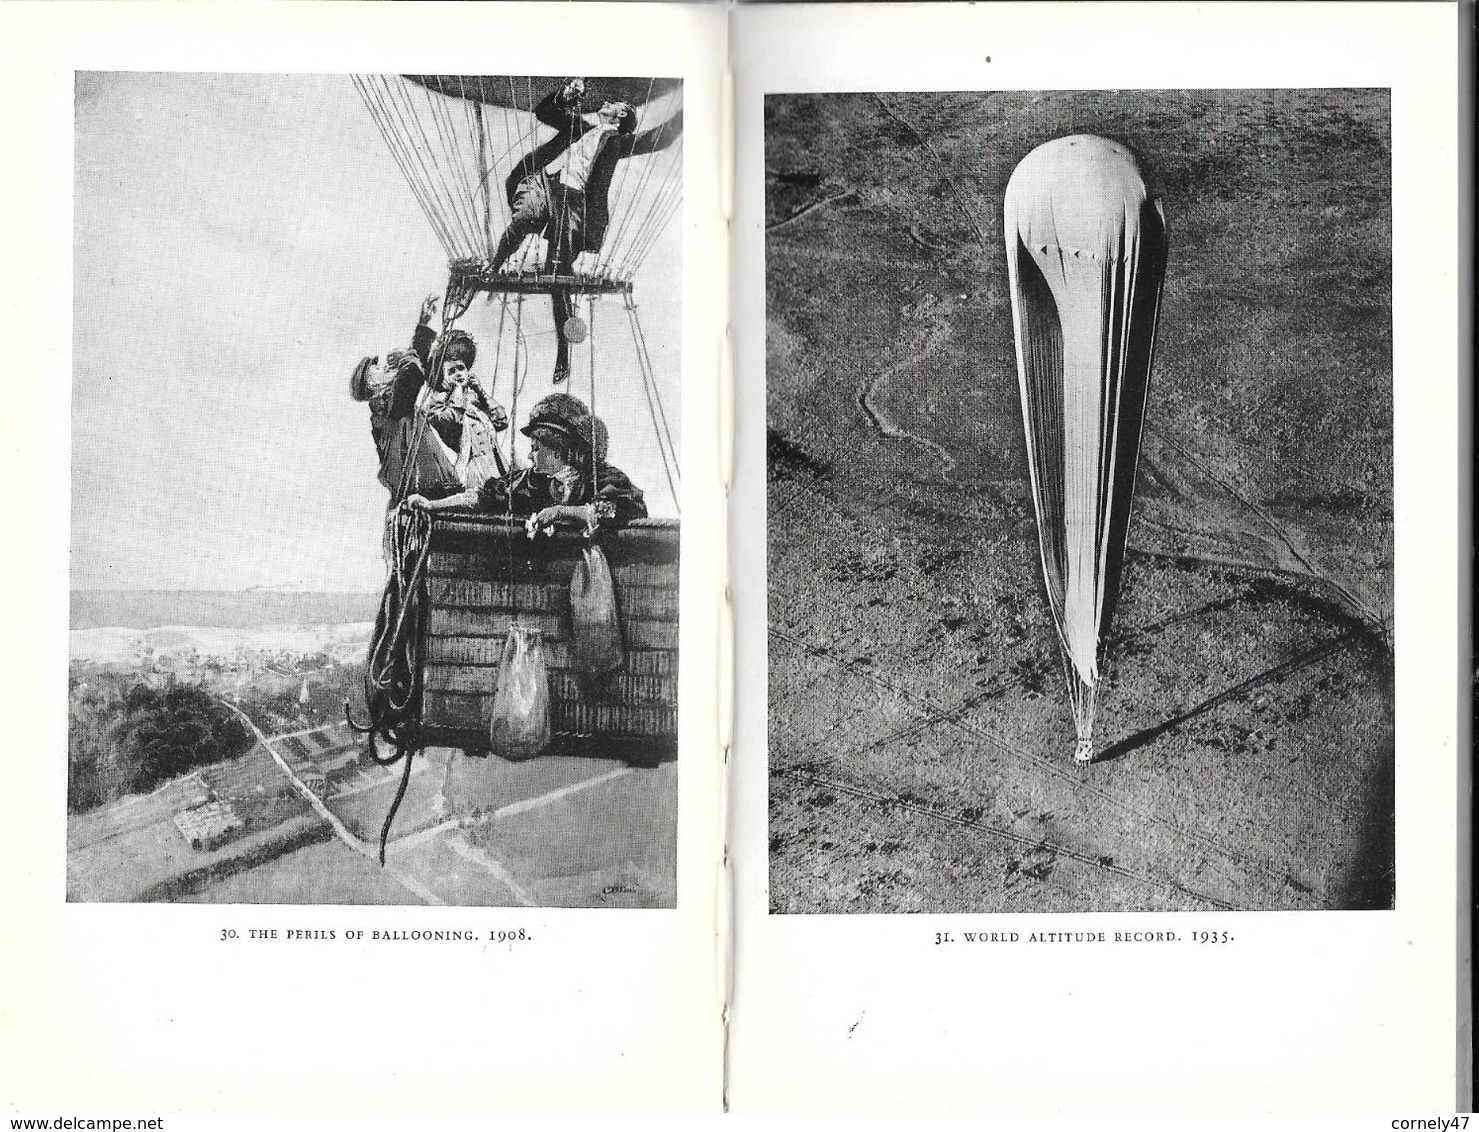 Histoire des aéronefs "Ballooning " by C.H.Gibbs-Smith  Premiers vols Accidents